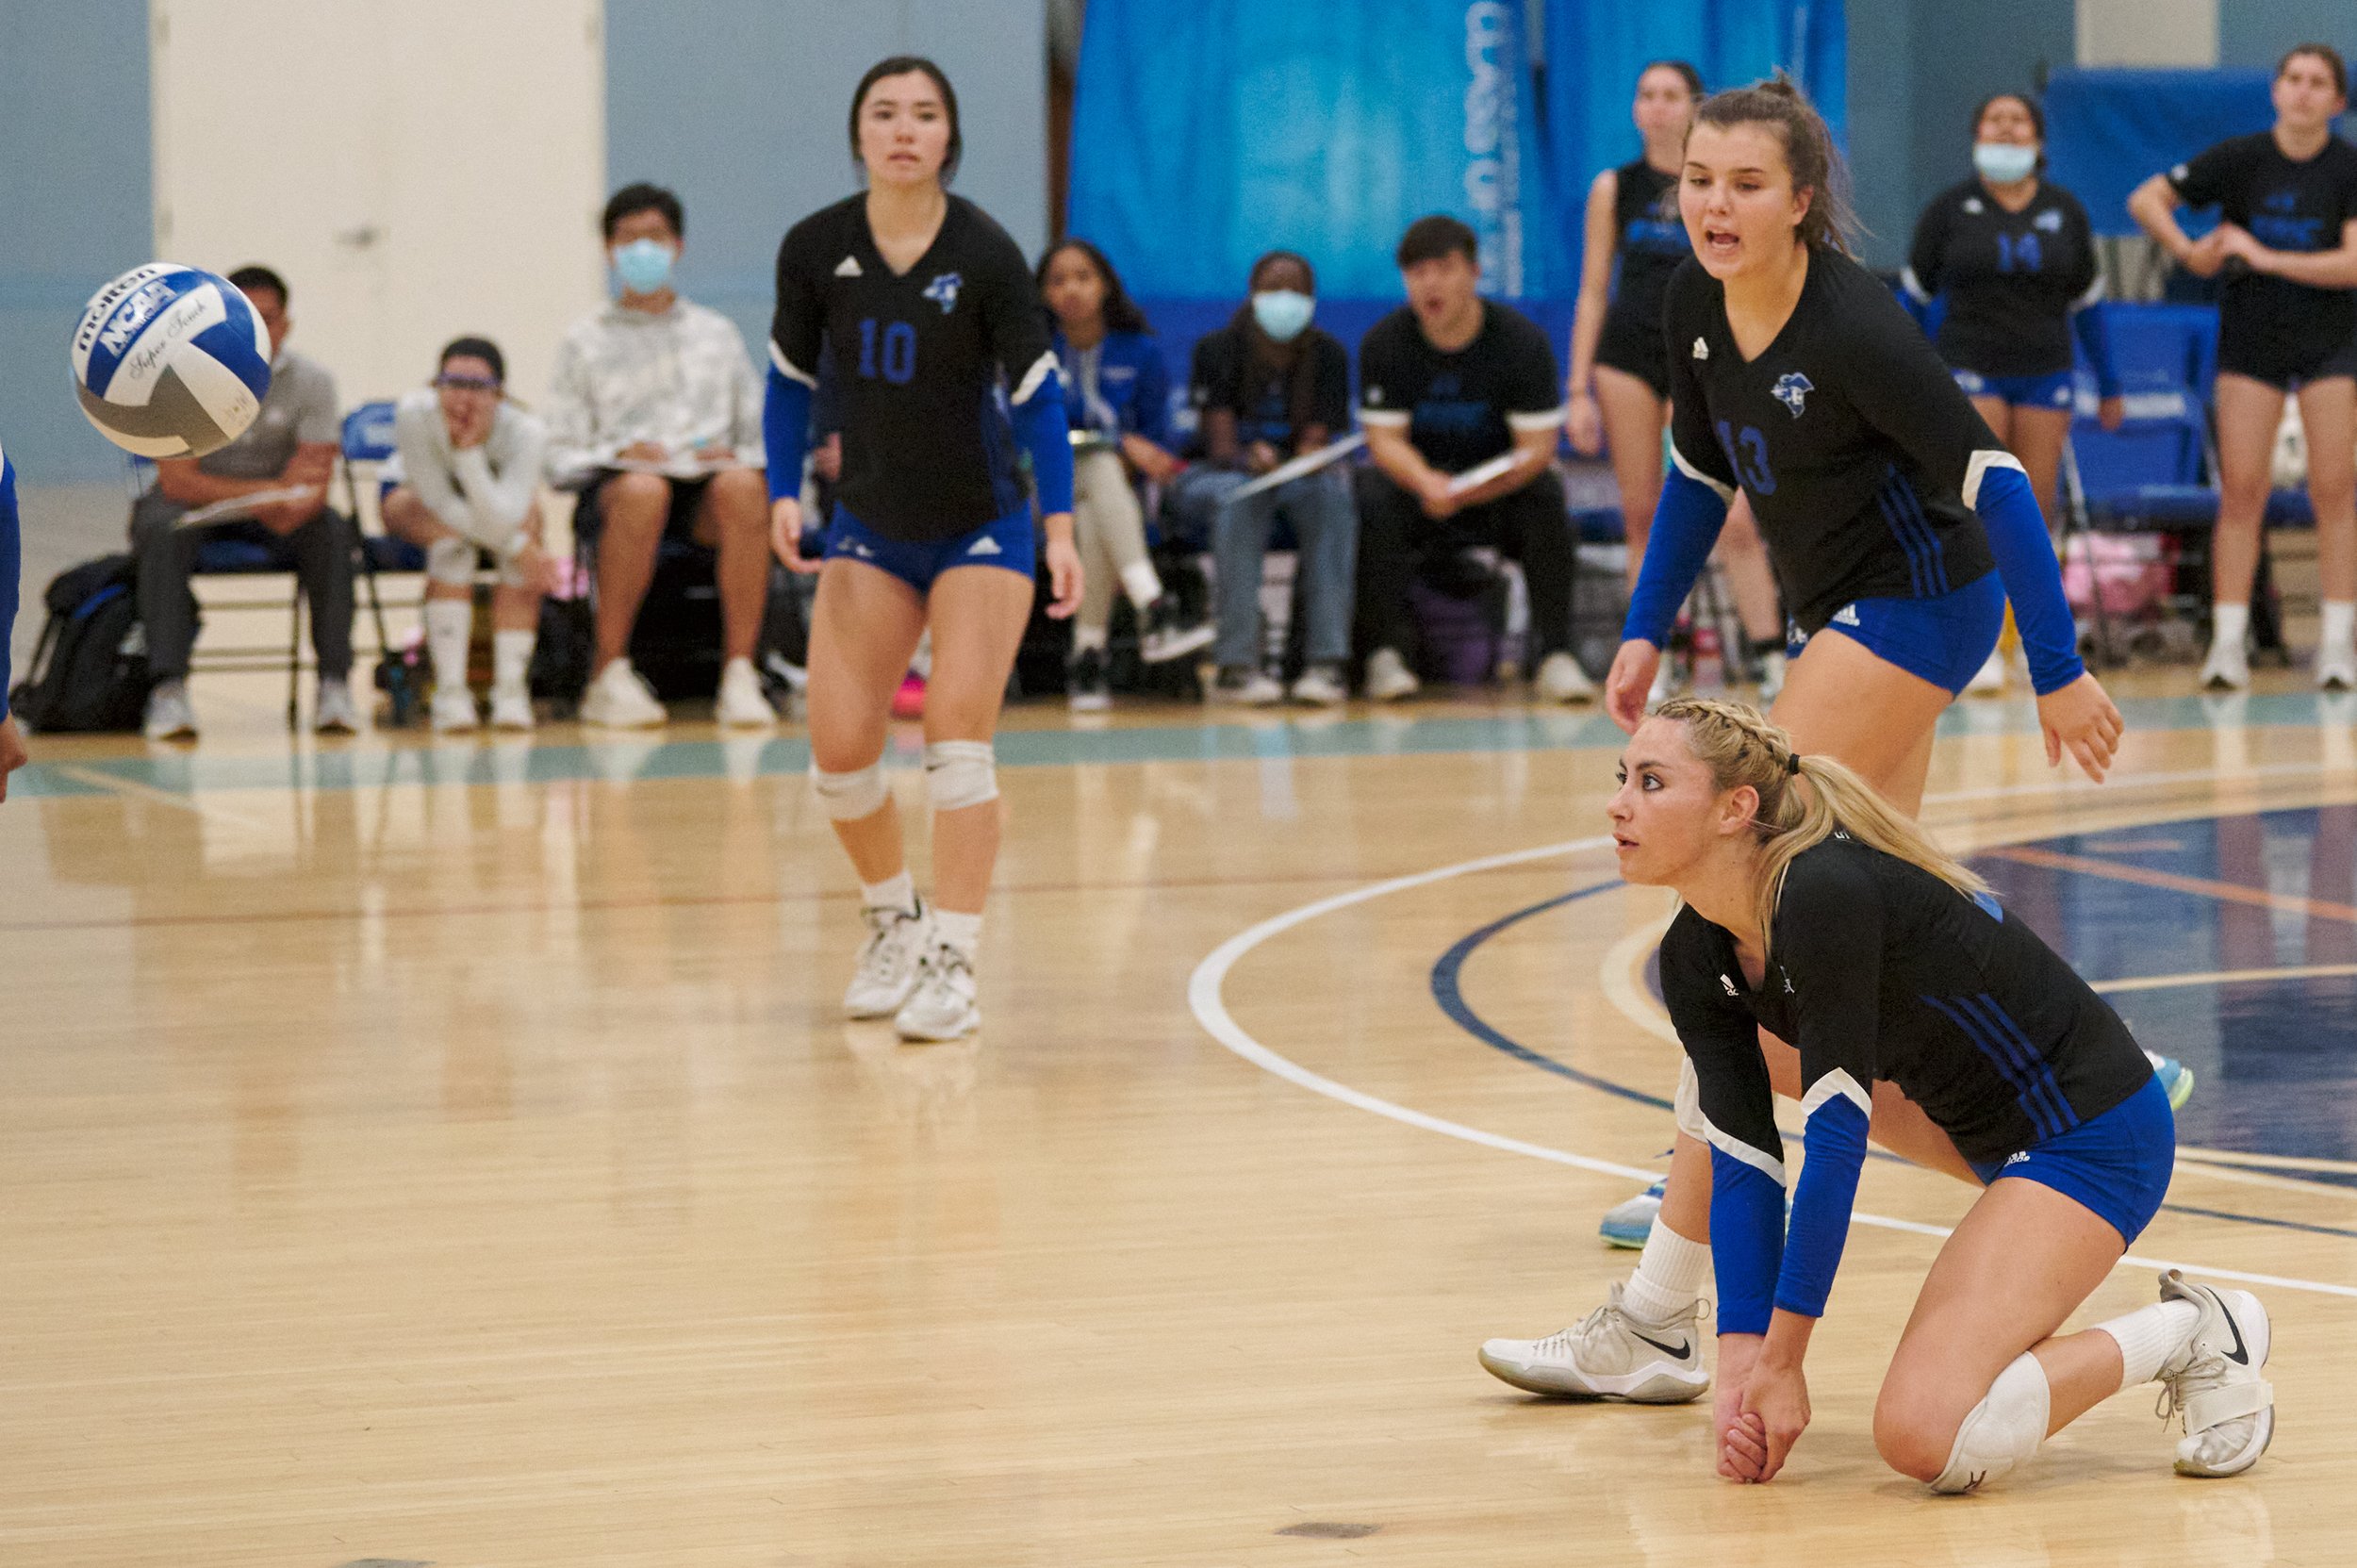  Santa Monica College Corsairs' Scheala Nielsen (kneeling), Mackenzie Wolff (right), and Sophia Odle (left) during the women's volleyball match against the Antelope Valley College Marauders on Wednesday, Oct. 12, 2022, at the Corsair Gym in Santa Mon